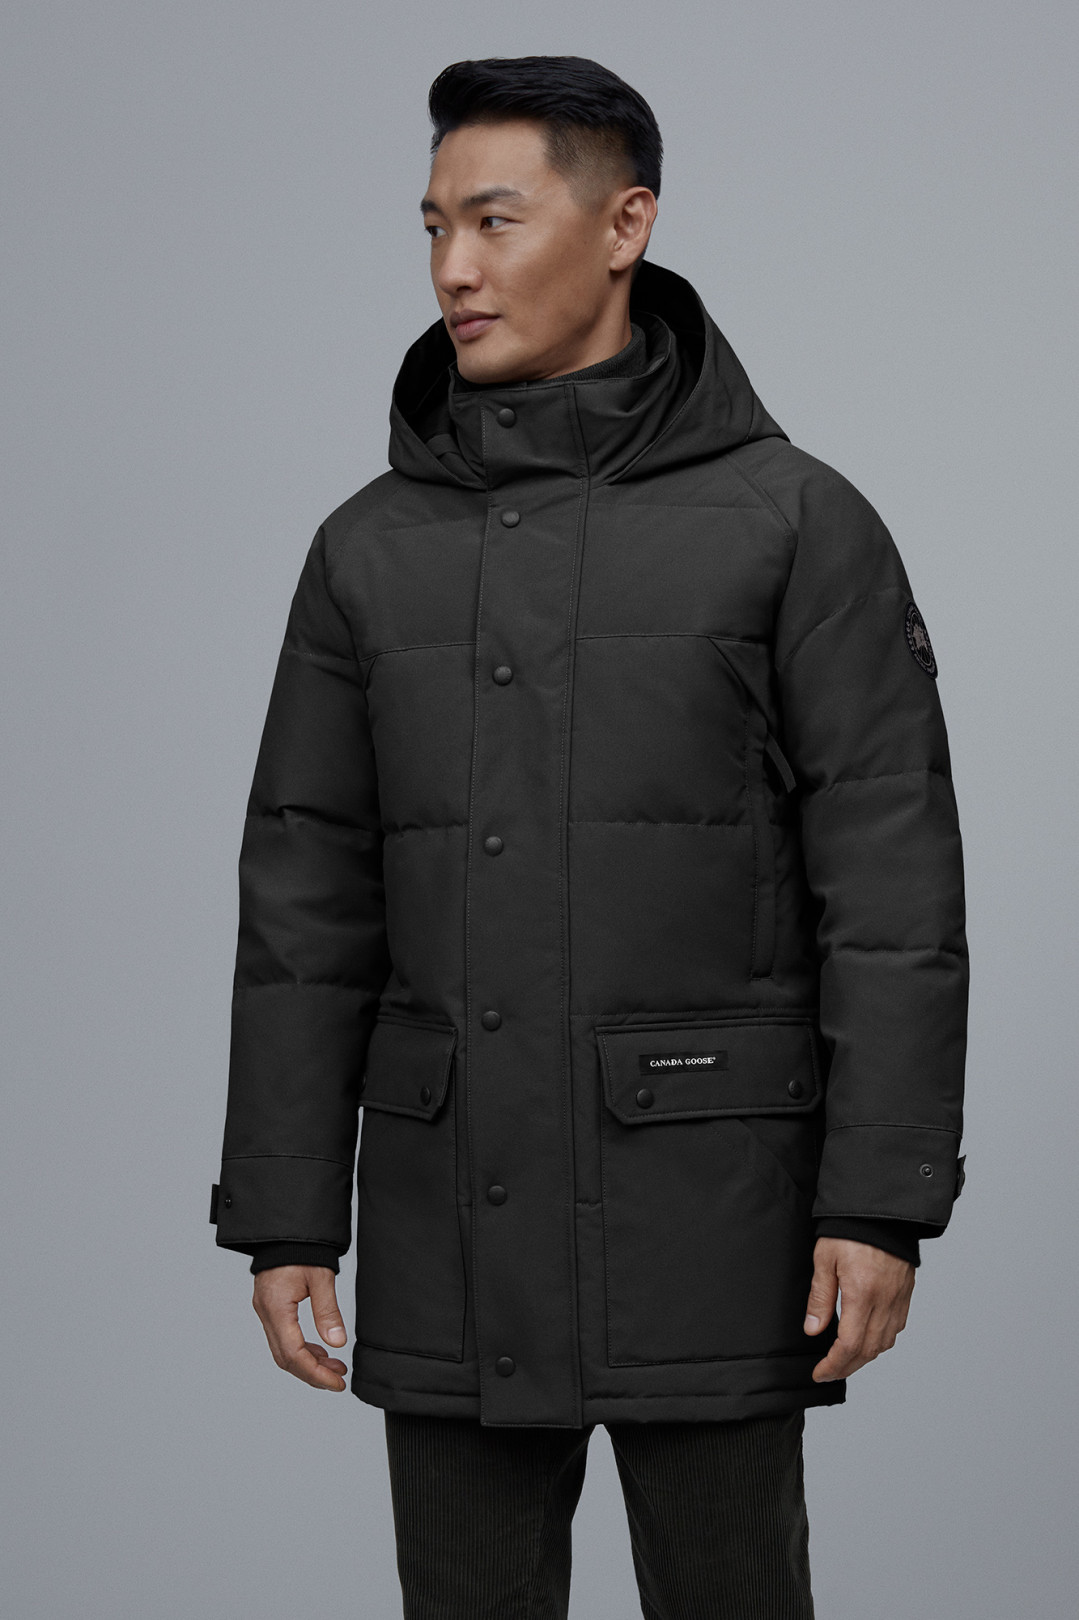 EMORY PARKA BLACK LABEL 13万8,600円（tax in）STYLE# 2580MB(9月11日発売)